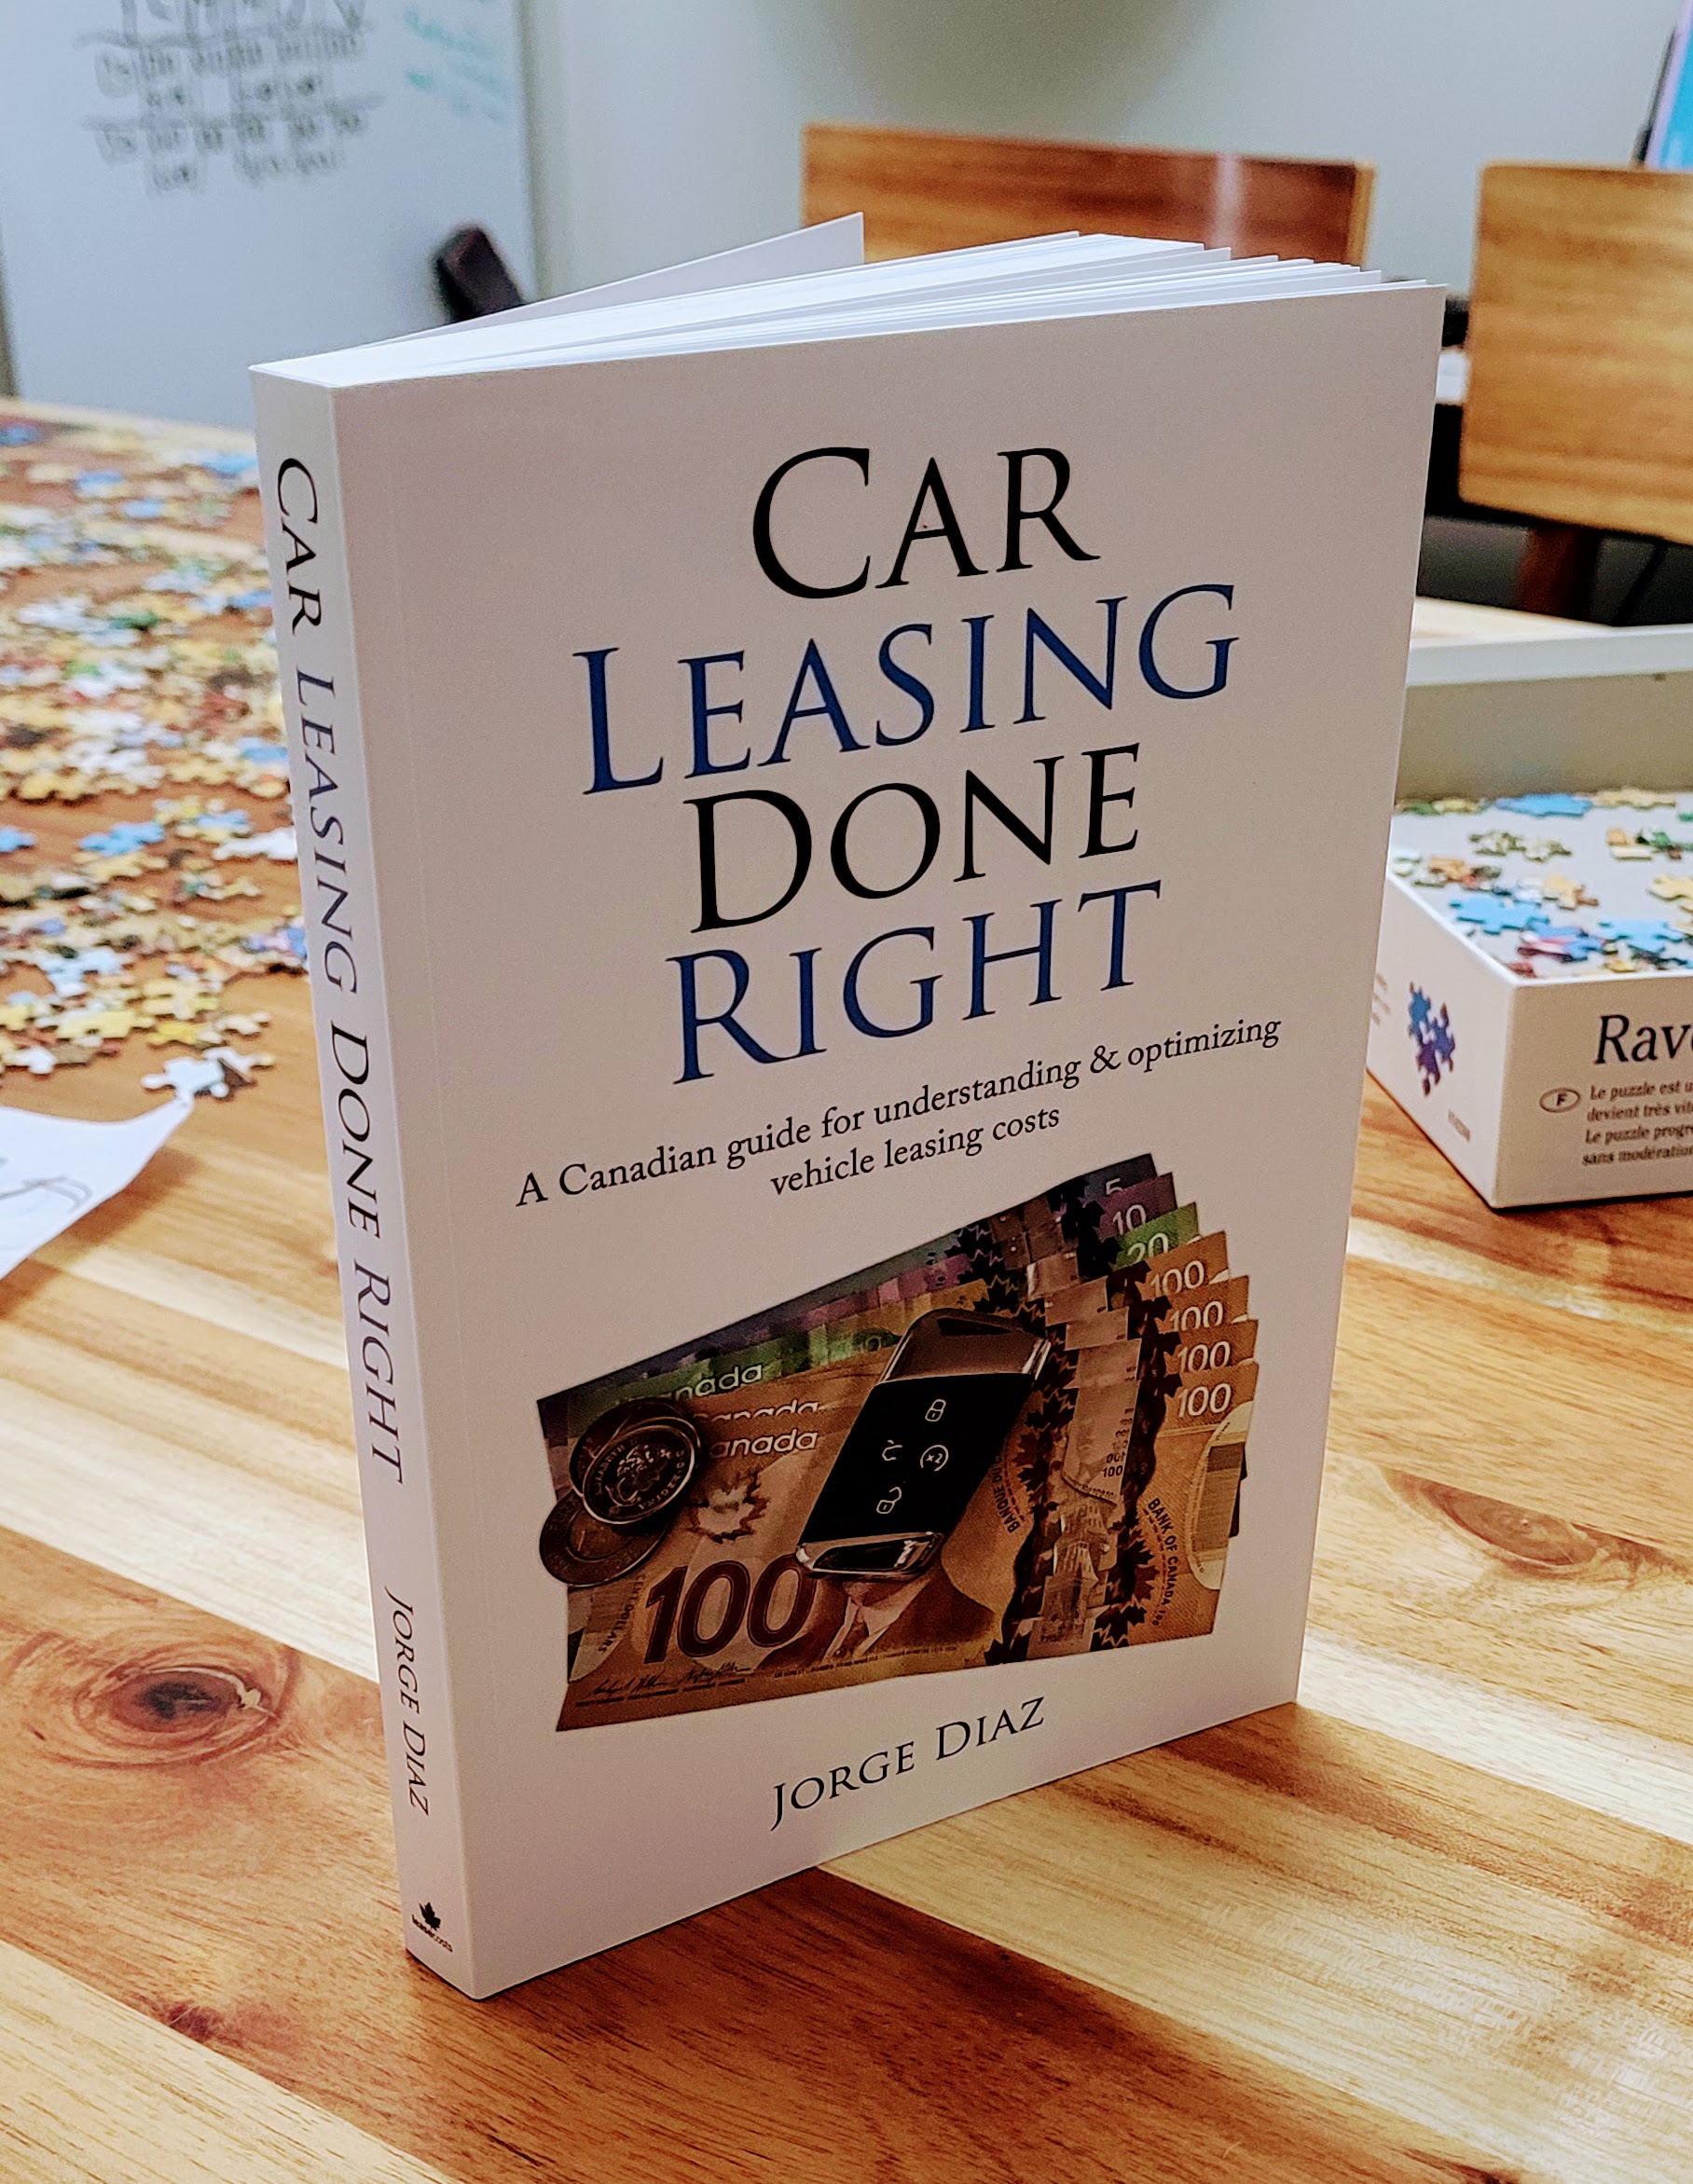 Car Leasing Done Right - The Book